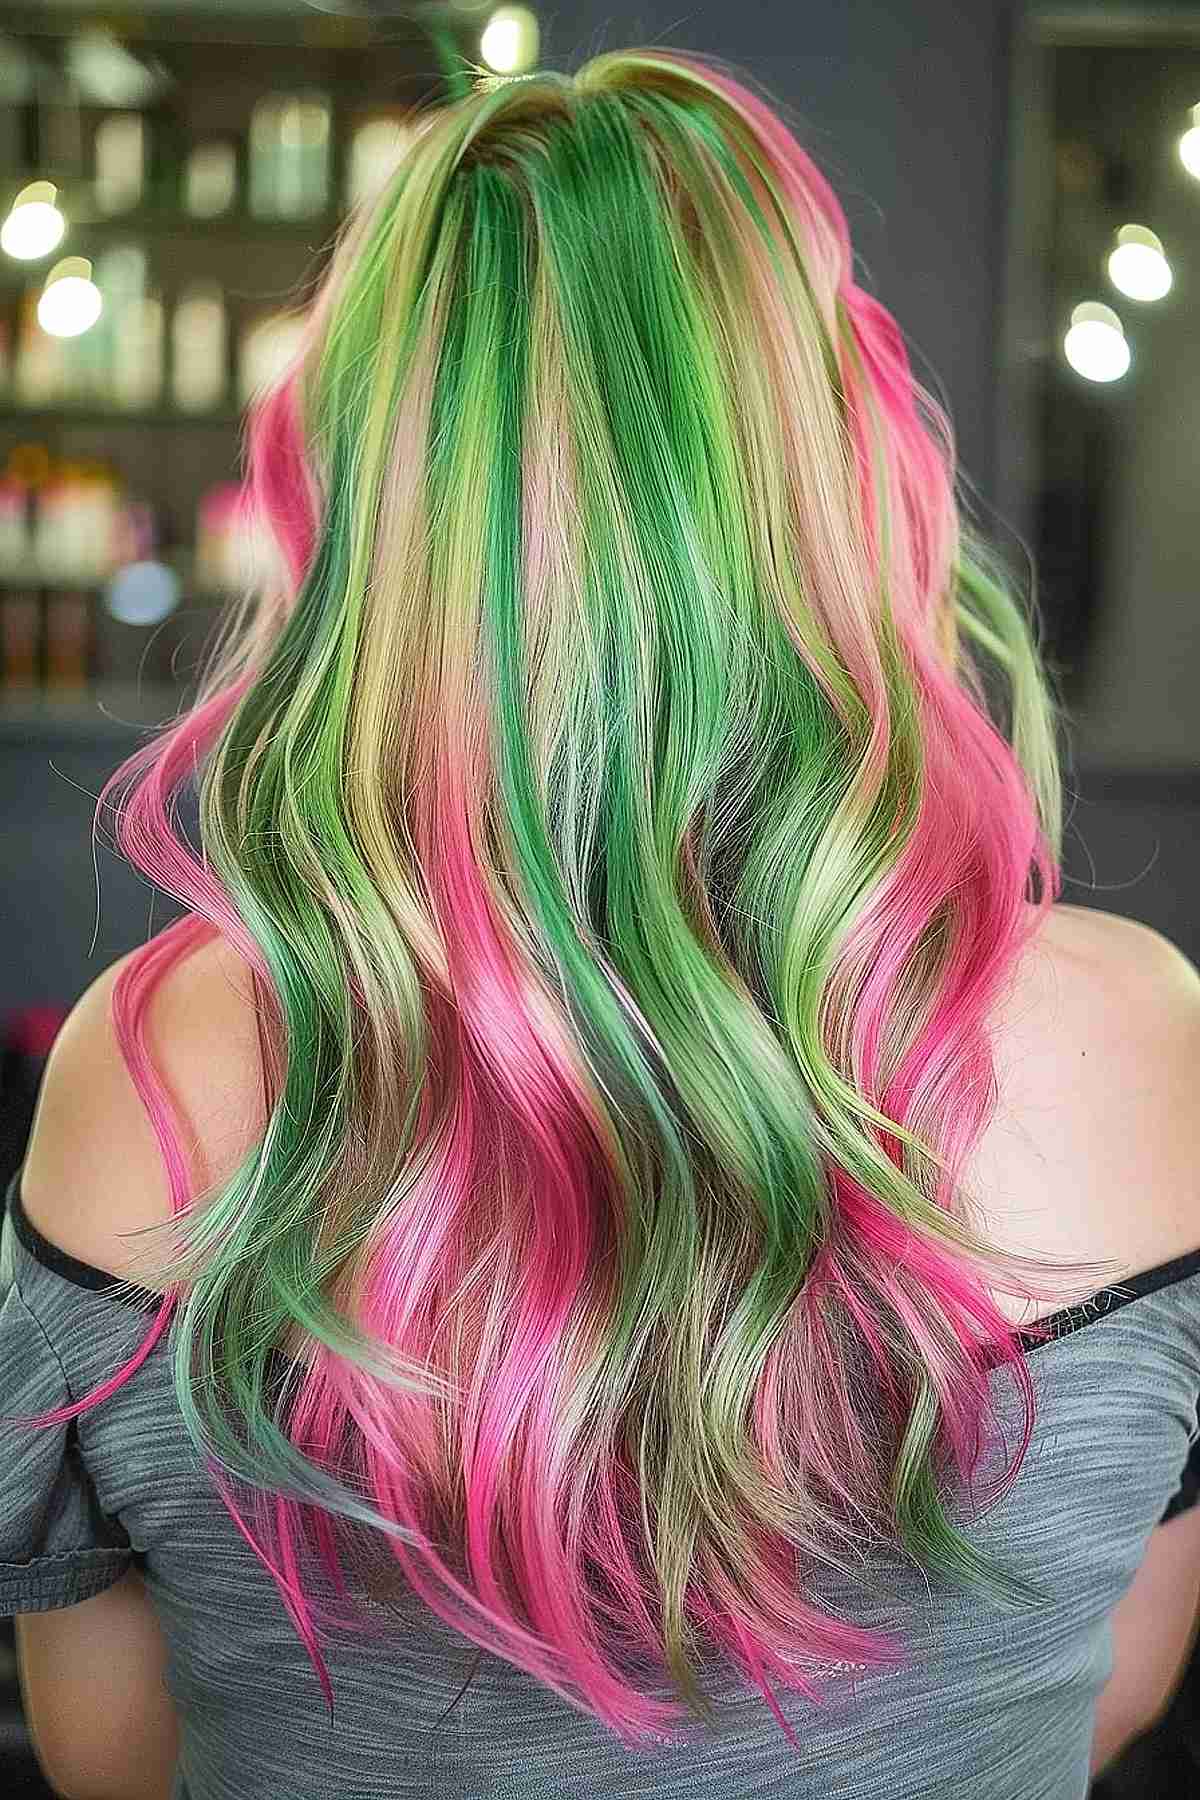 A woman's back view showing her long, wavy hair with a vibrant mix of green and pink tints, achieving a dynamic and colorful watermelon-inspired look.